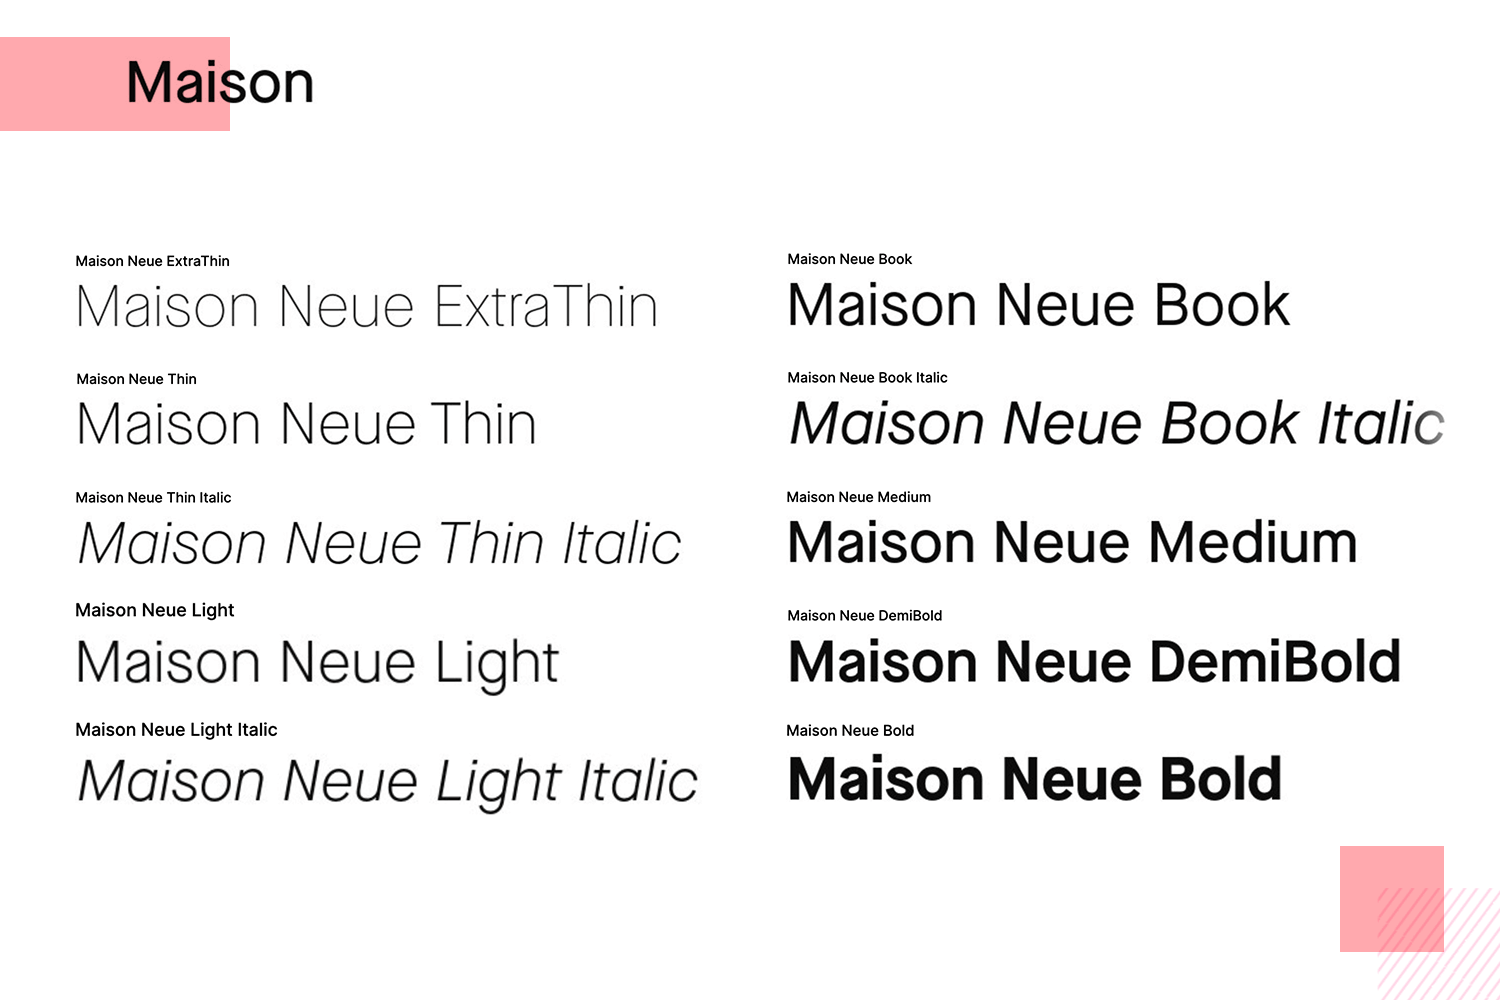 Maison font variations in bold, italic, regular, and book styles